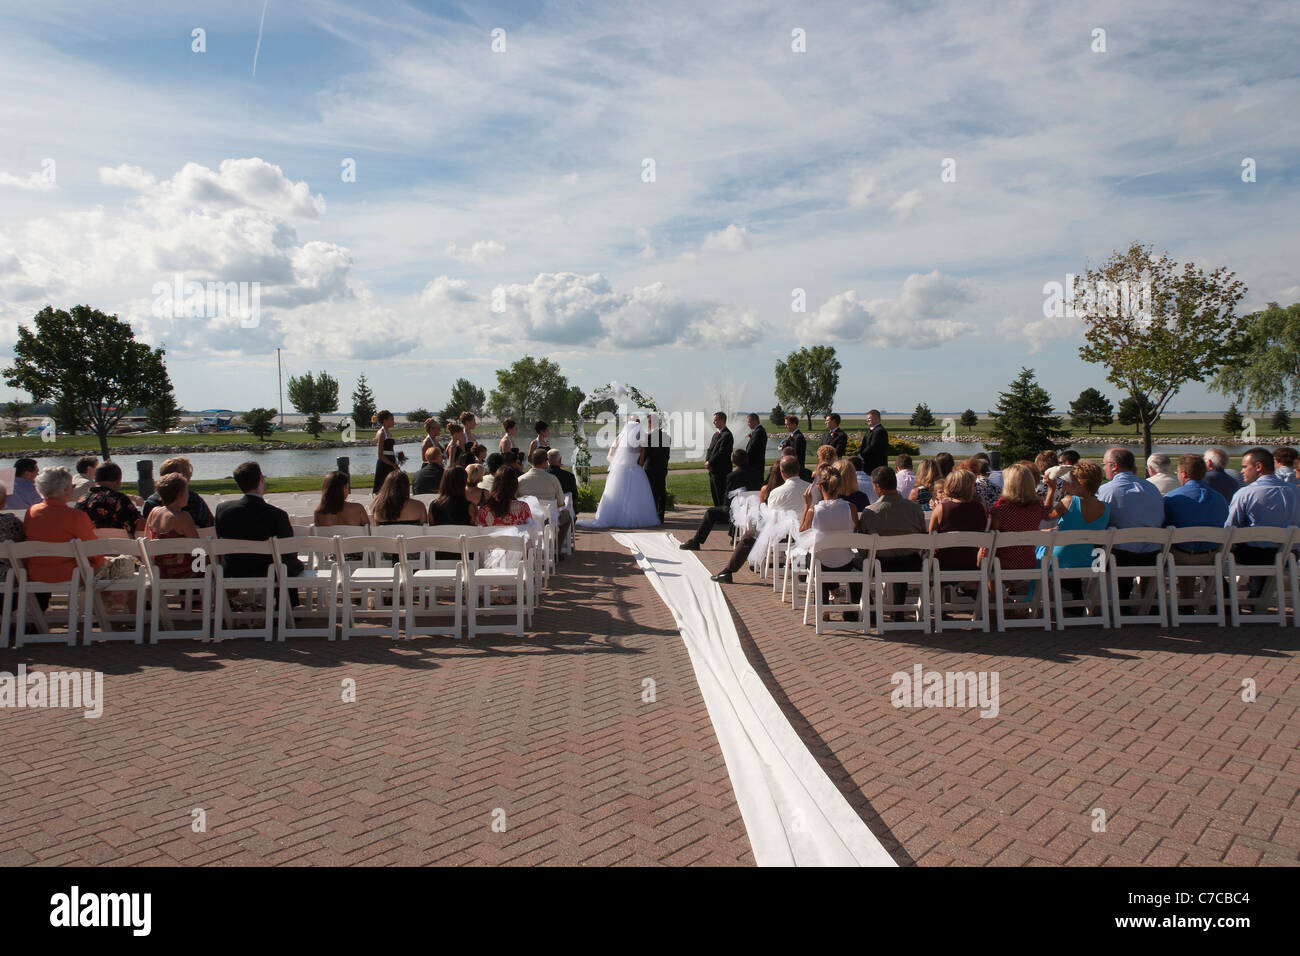 Outside wedding ceremony during beautiful summer day.Bride,groom, priest, bridesmaids, groomsmen and whole wedding party. Stock Photo